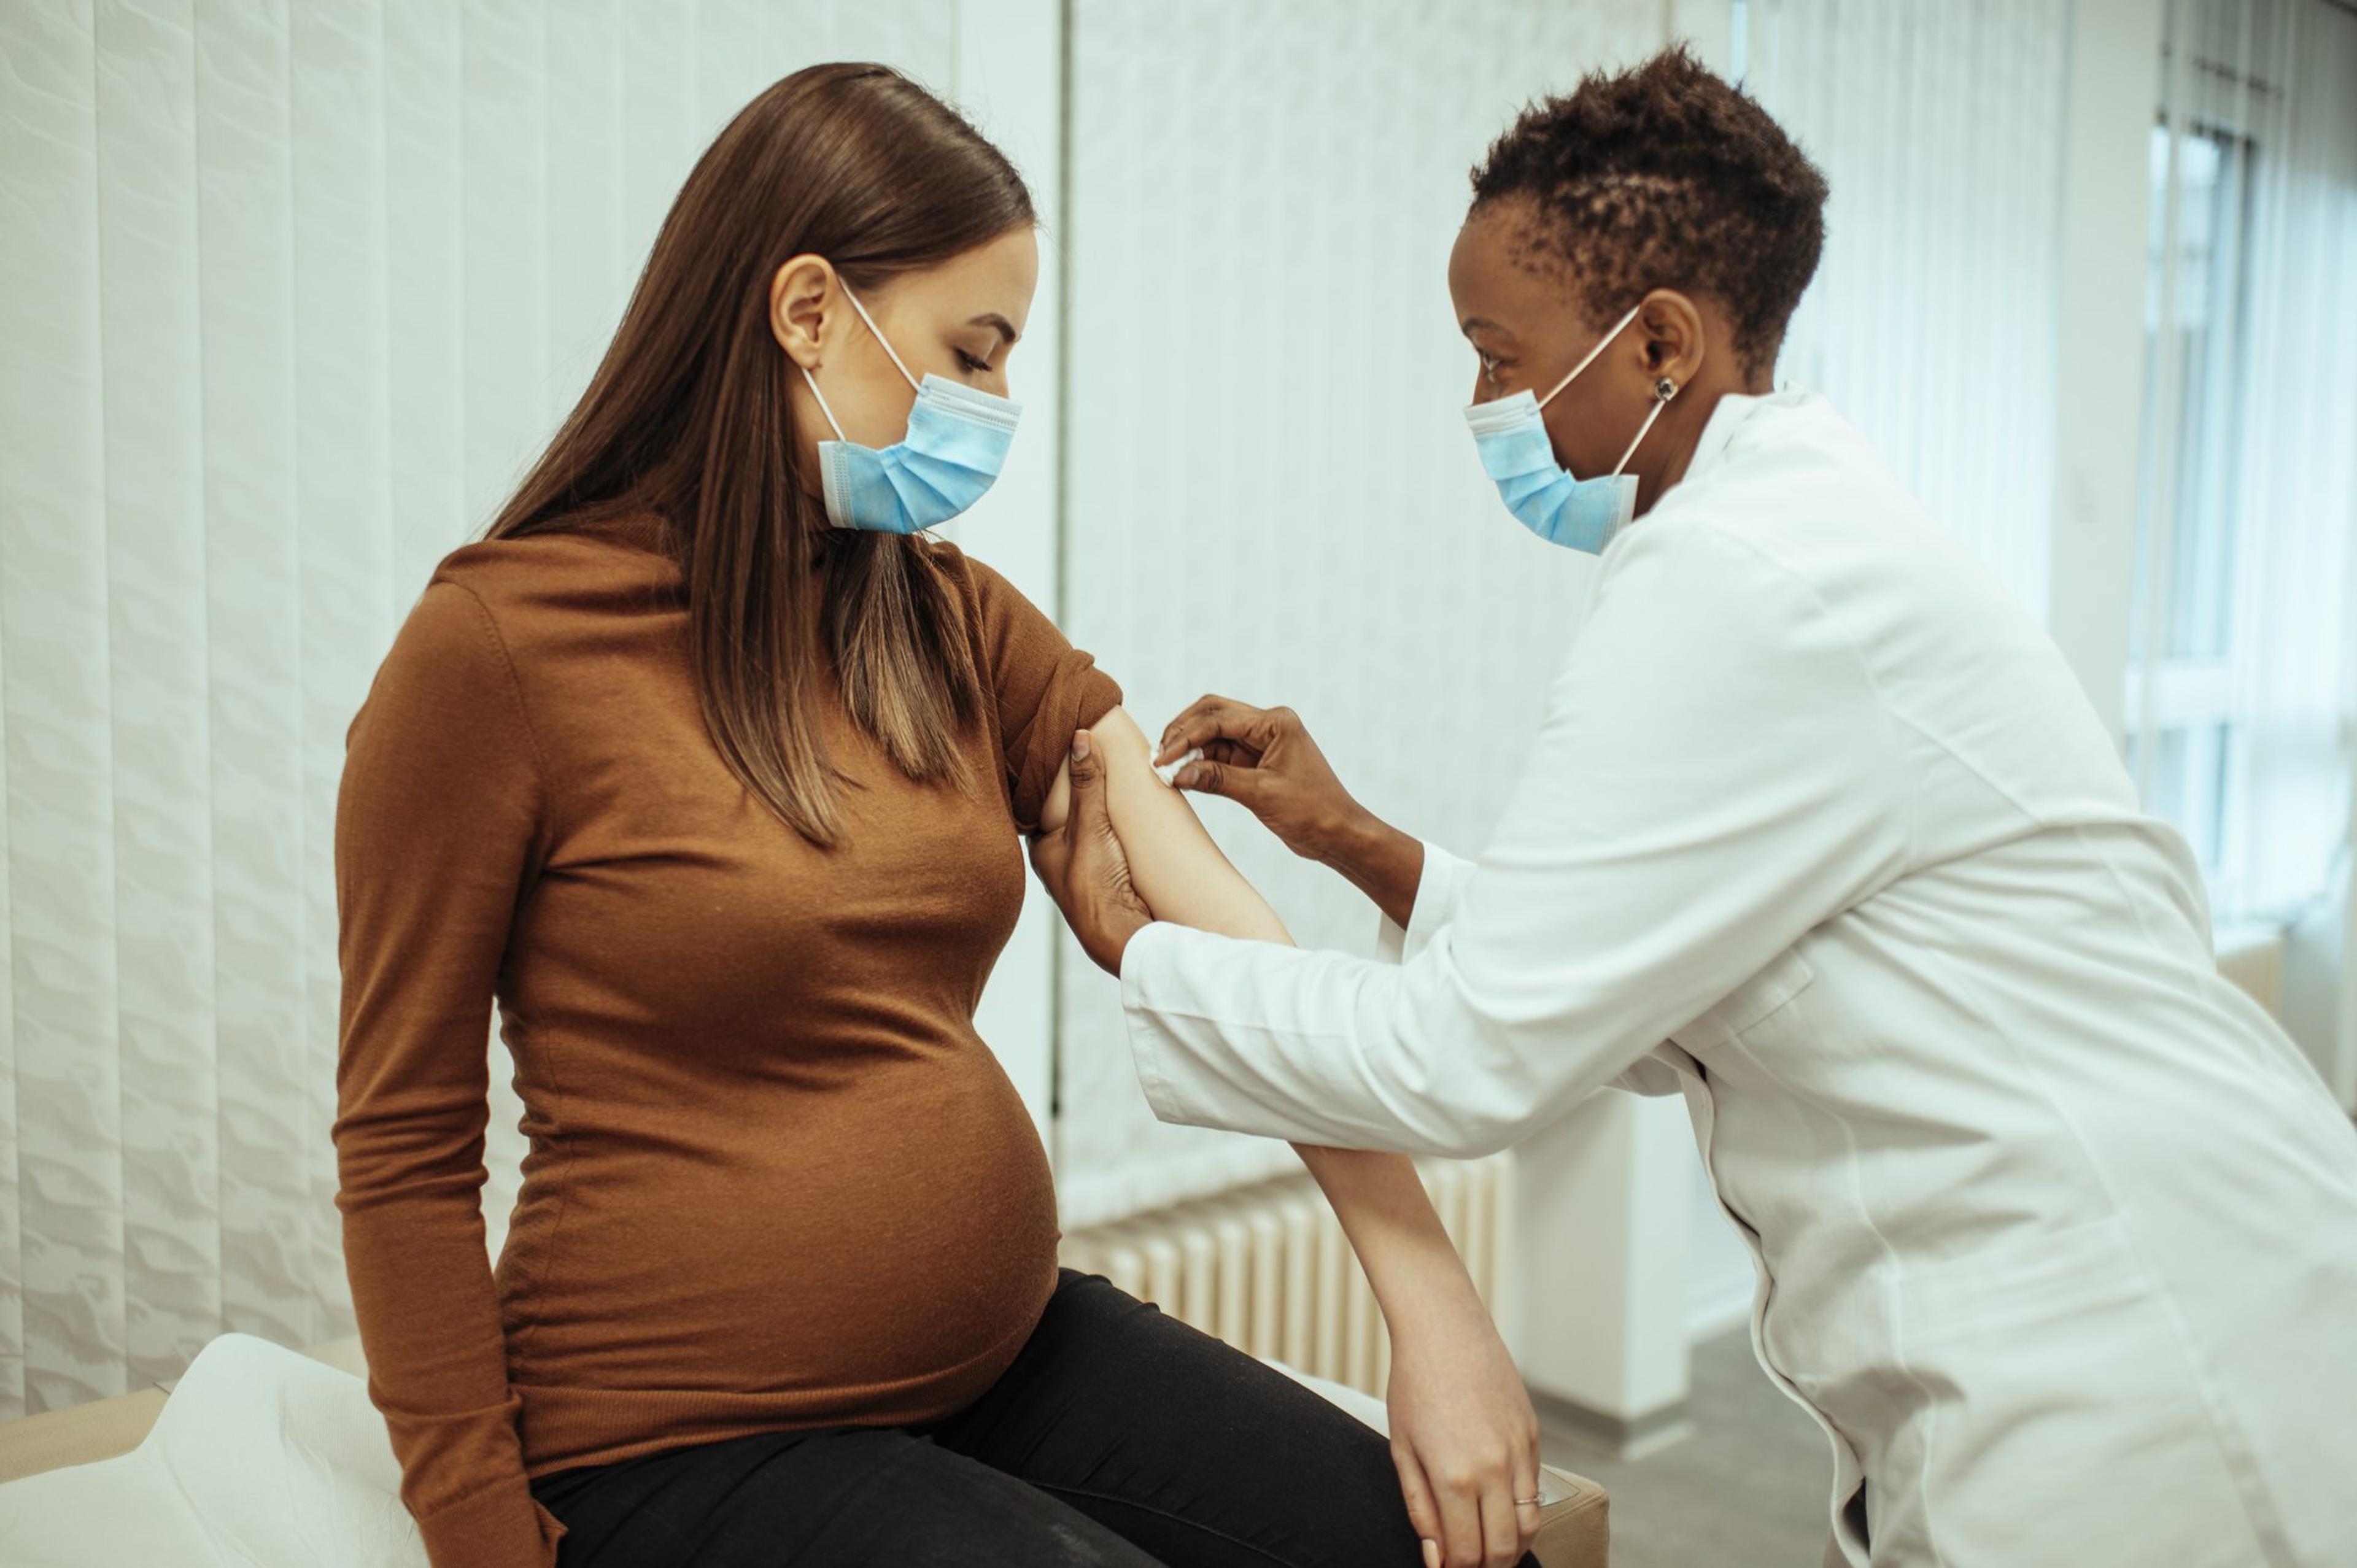 Pregnant woman wearing a mask receives a covid-19 vaccine from a female doctor wearing a mask